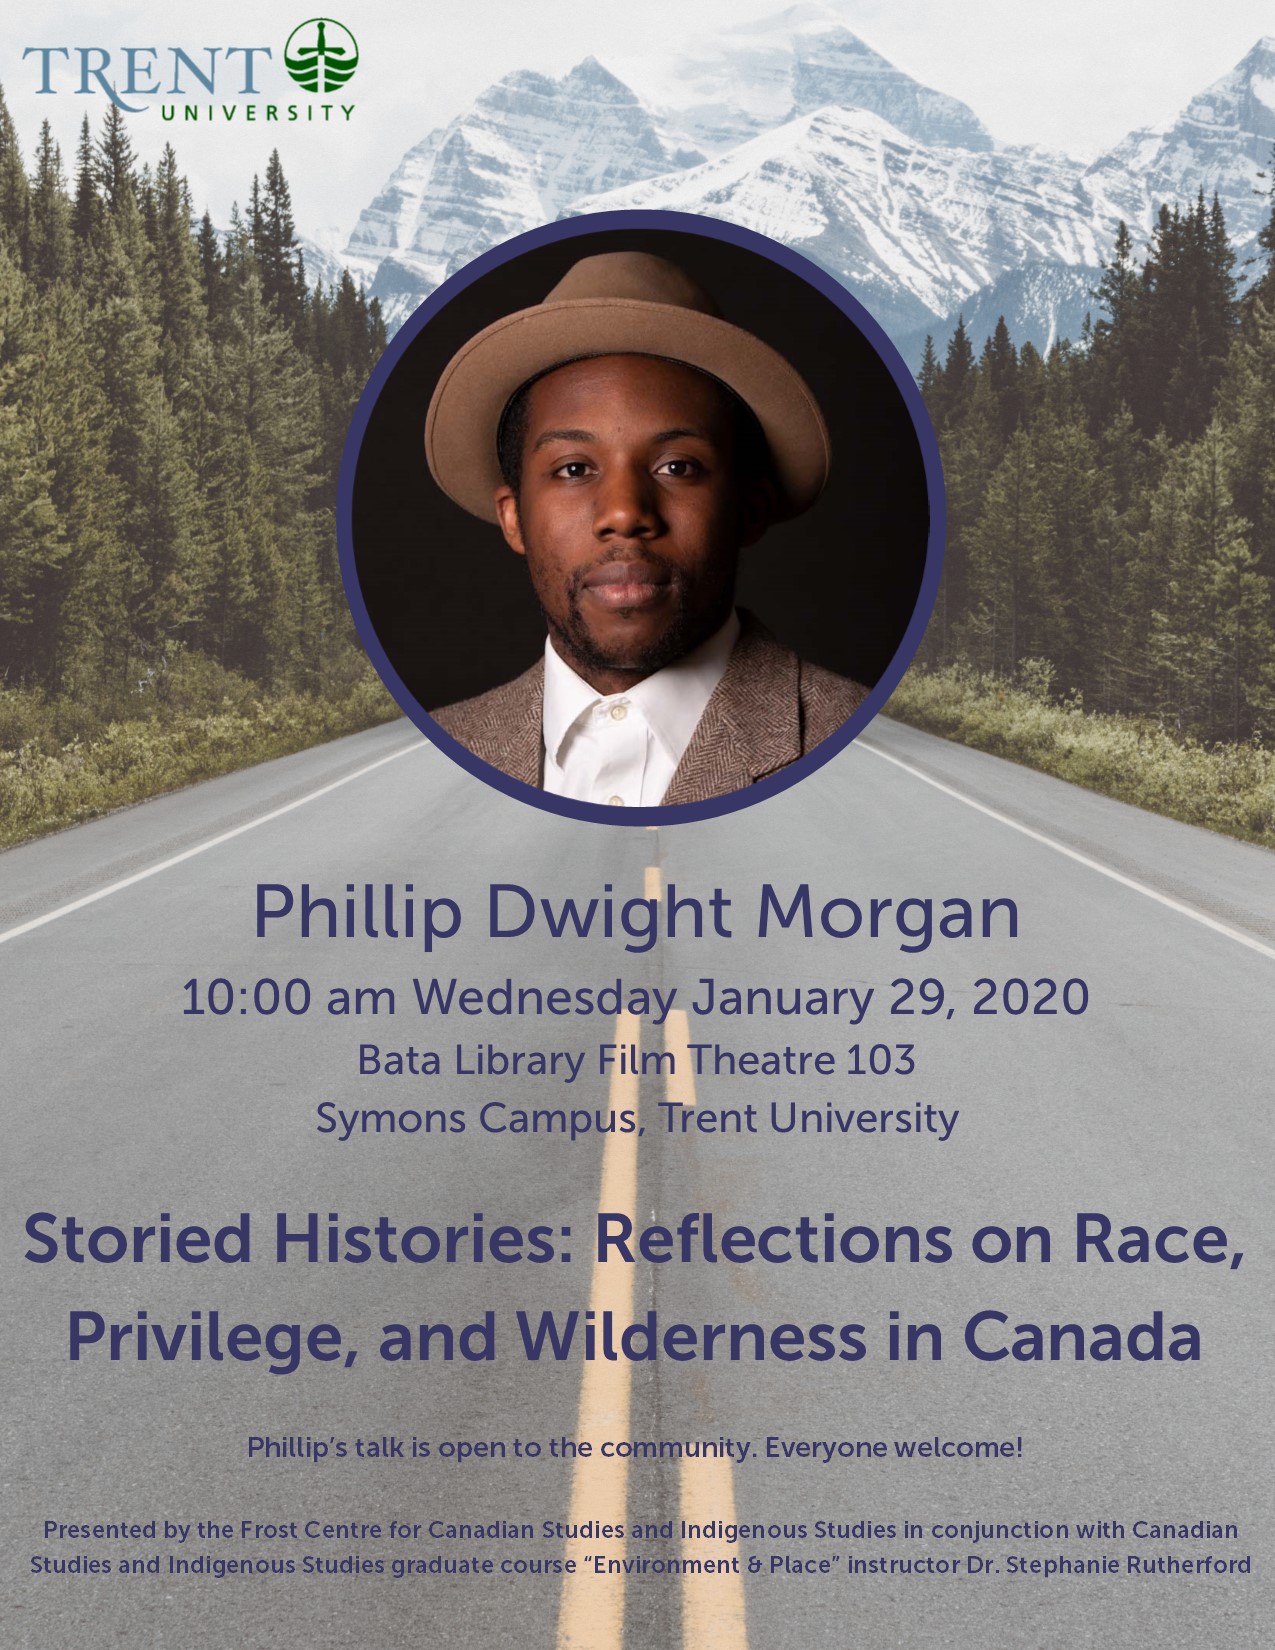 "Storied Histories: Reflections on Race, Privilege, and Wilderness in Canada" 29 January 2020 with Phillip Dwight Morgan